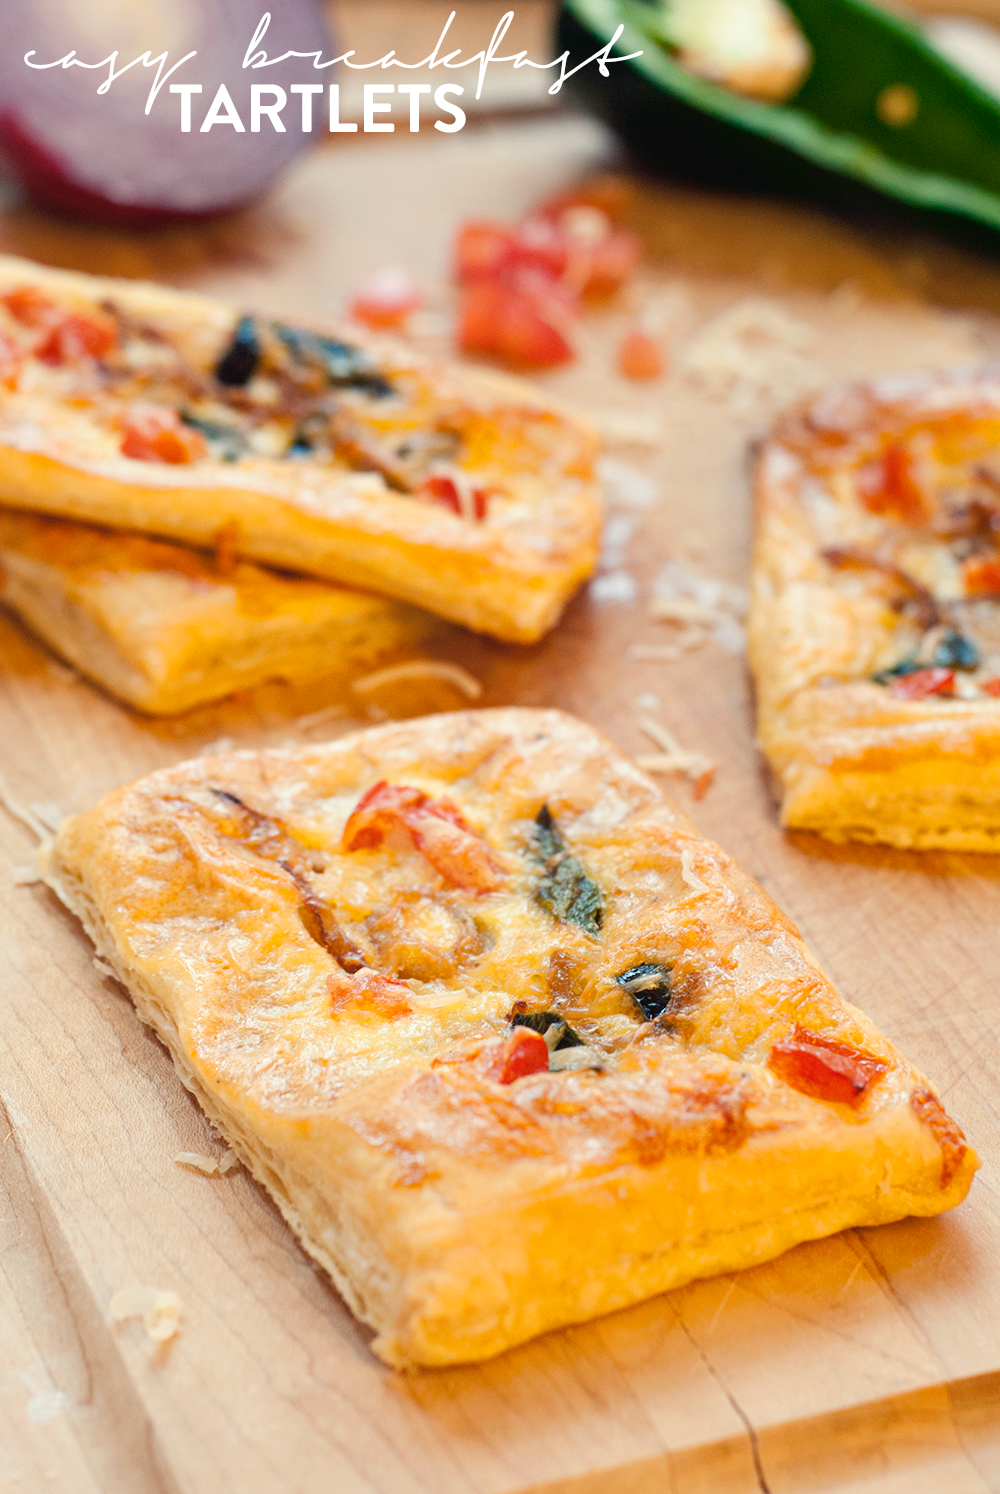 Start your morning off right with an amazingly delicious and flavorful easy breakfast tartlet!